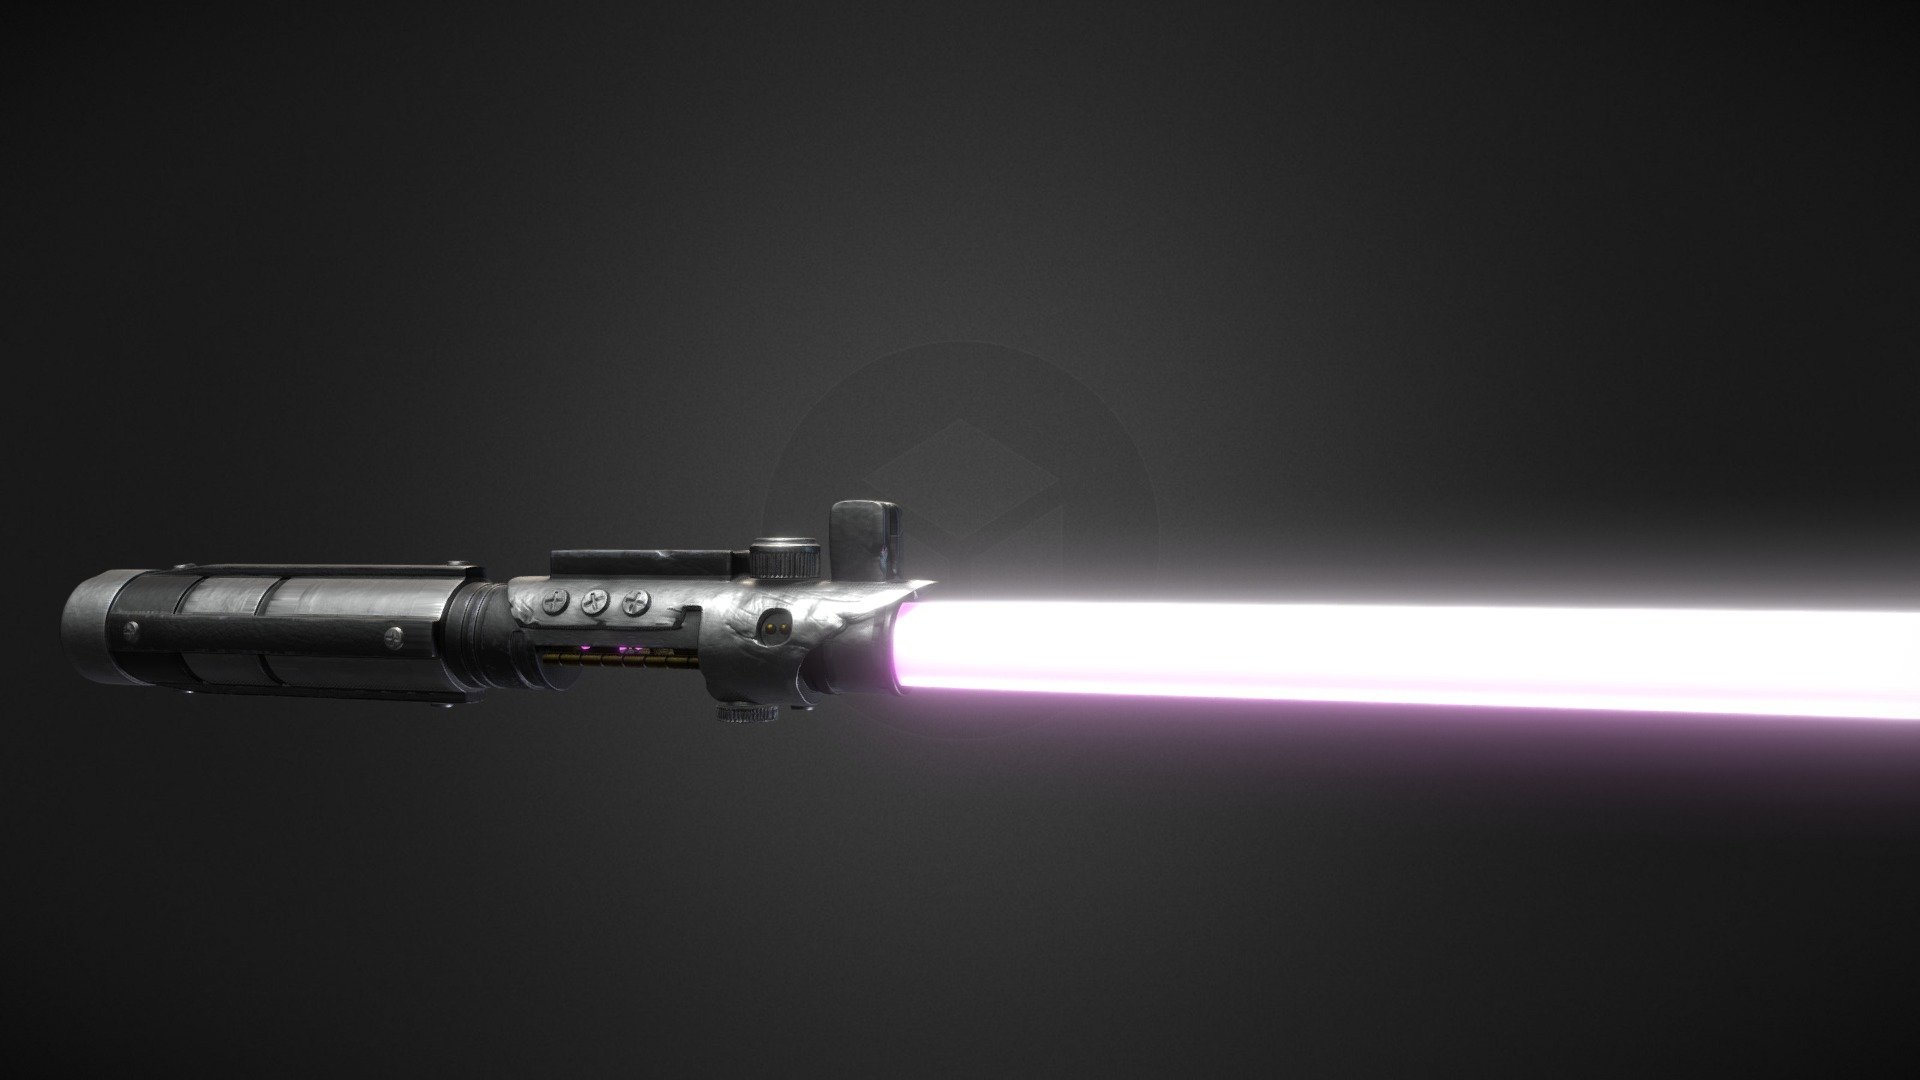 I made this lightsaber as a prop for a class in 2020. I didn't know anything about texturing at the time so there is some texture stretching and lighting issues because of bad UVs and texture maps.

If you have any criticism/feedback on things that you like or don’t like I’d love to hear it!

ArtStation: https://www.artstation.com/tacosmuggler - Galen Marek's Lightsaber - 3D model by TacoSmuggler 3d model